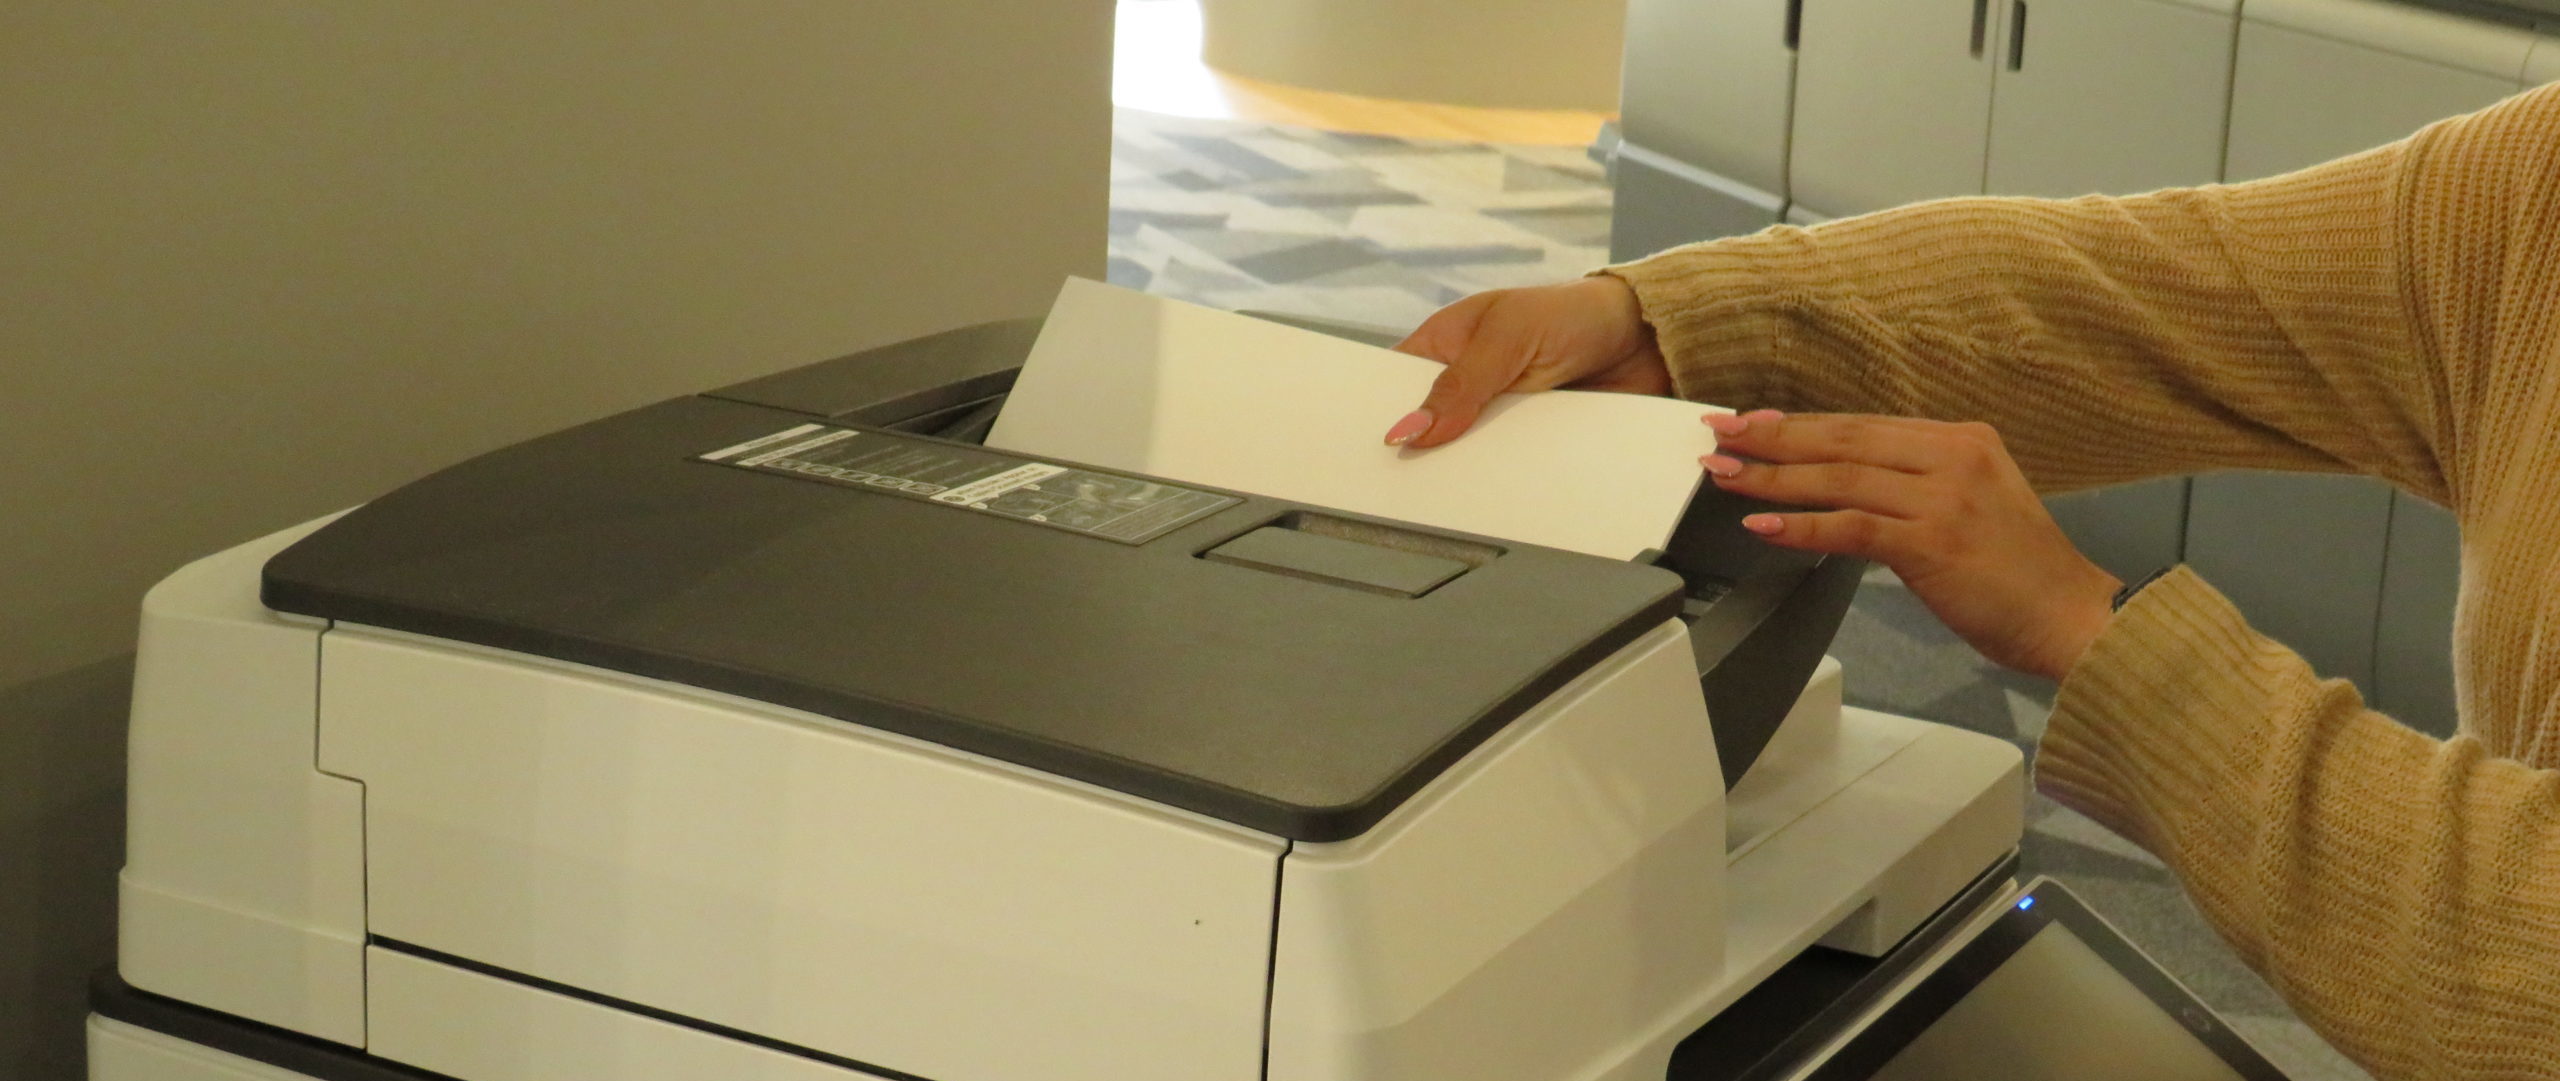 A woman putting paper in the printer